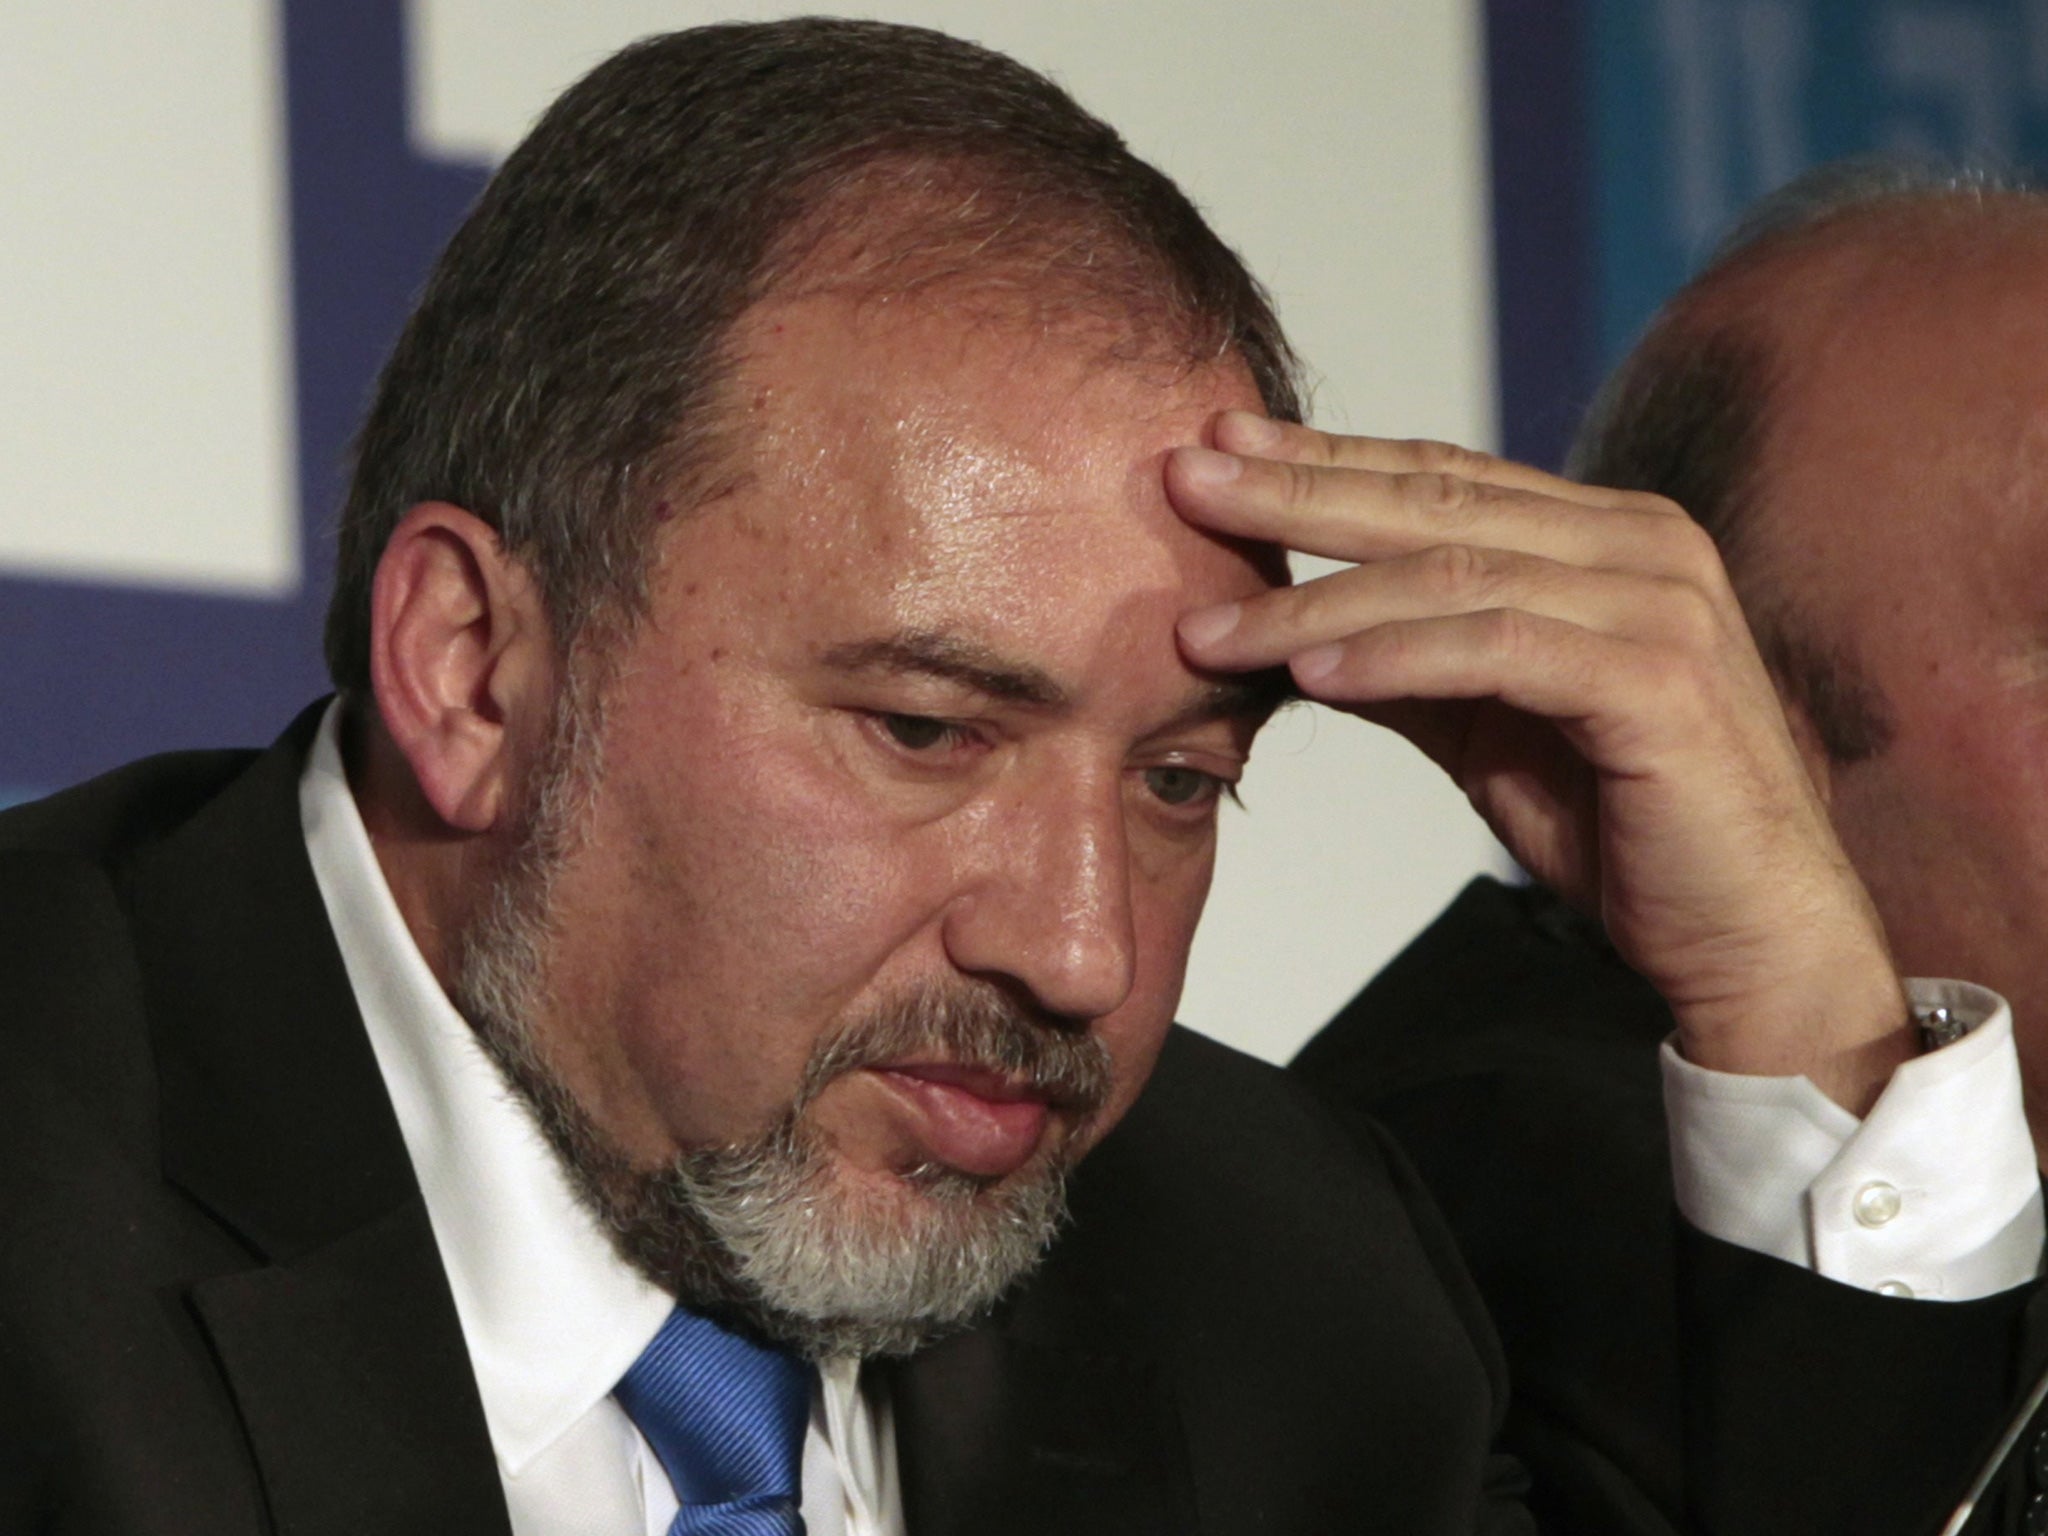 Avigdor Lieberman: The Yisrael Beiteinu leader says he wants the matter quickly resolved in court